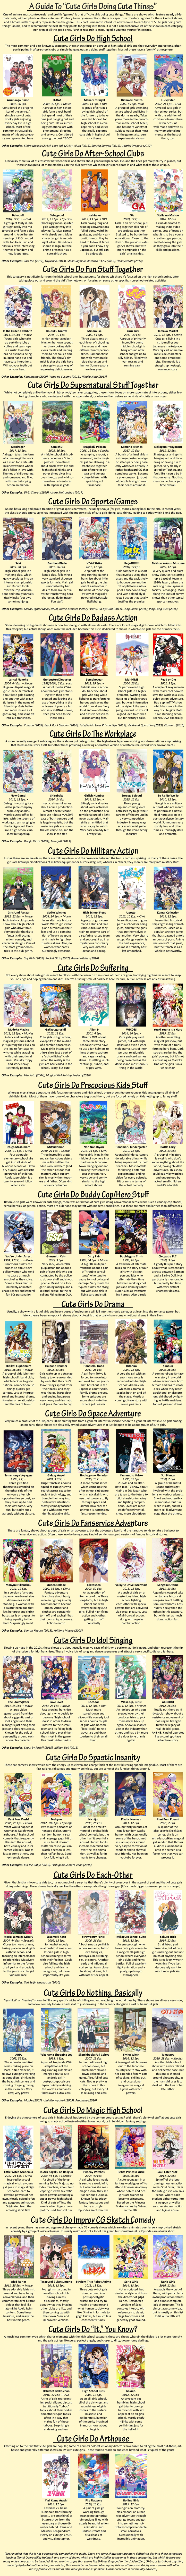 My guide for CGDCT! : r/Animesuggest